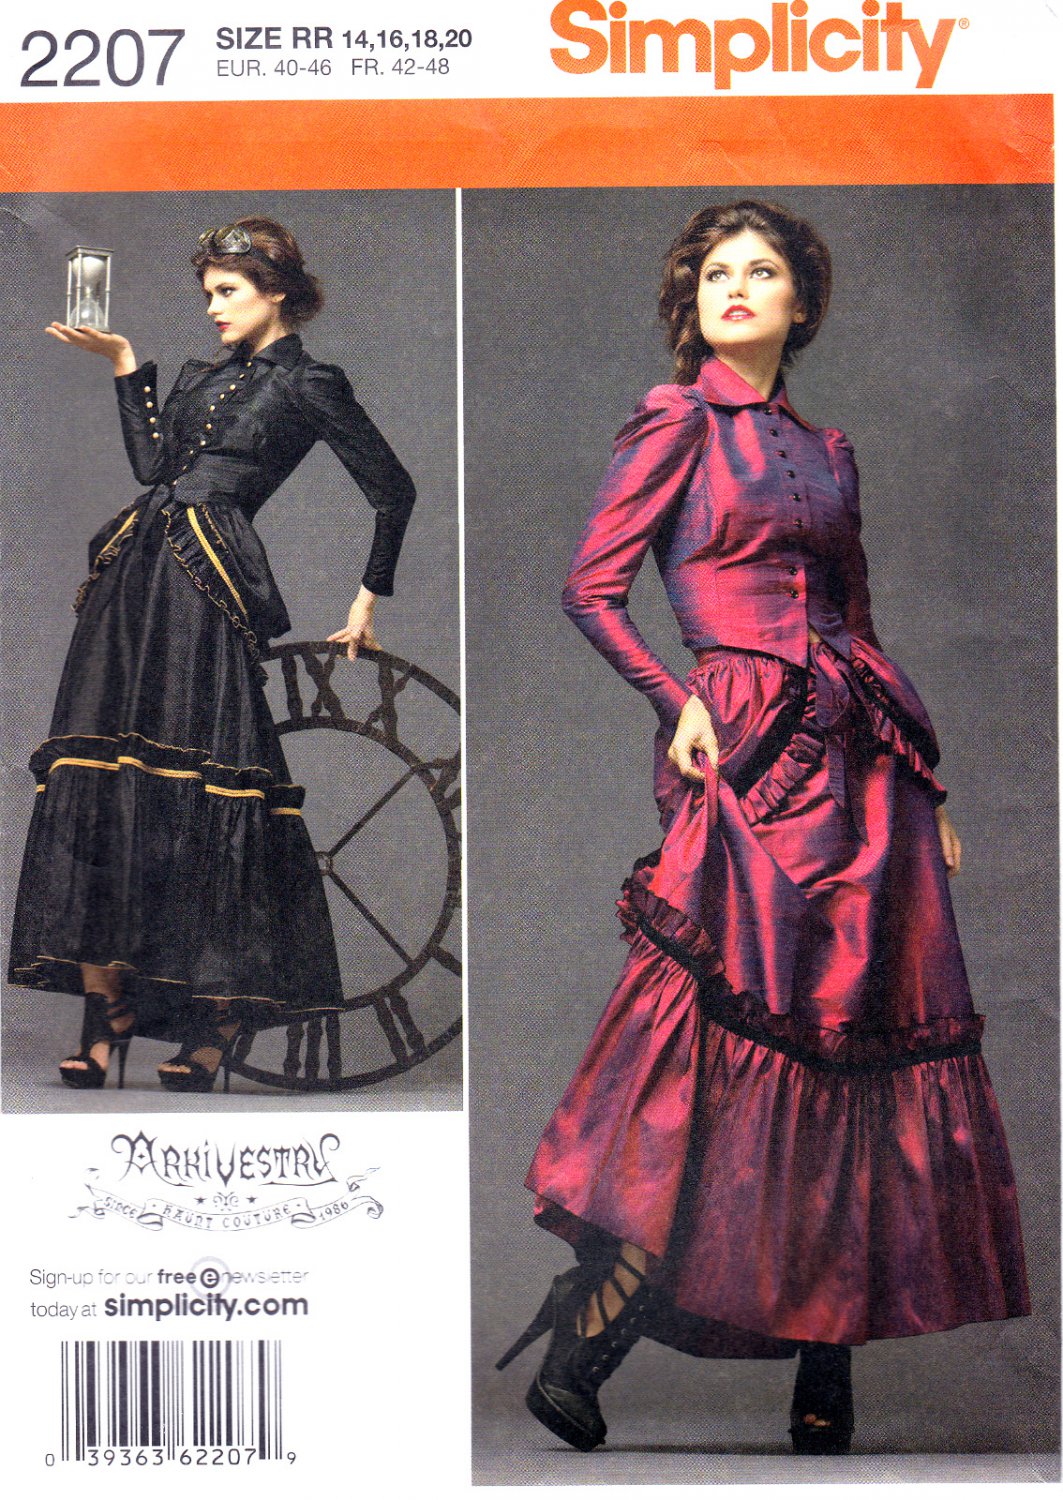 Simplicity 2207 Womens Misses Steampunk Victorian Costume Sewing Pattern Sizes 14-16-18-20